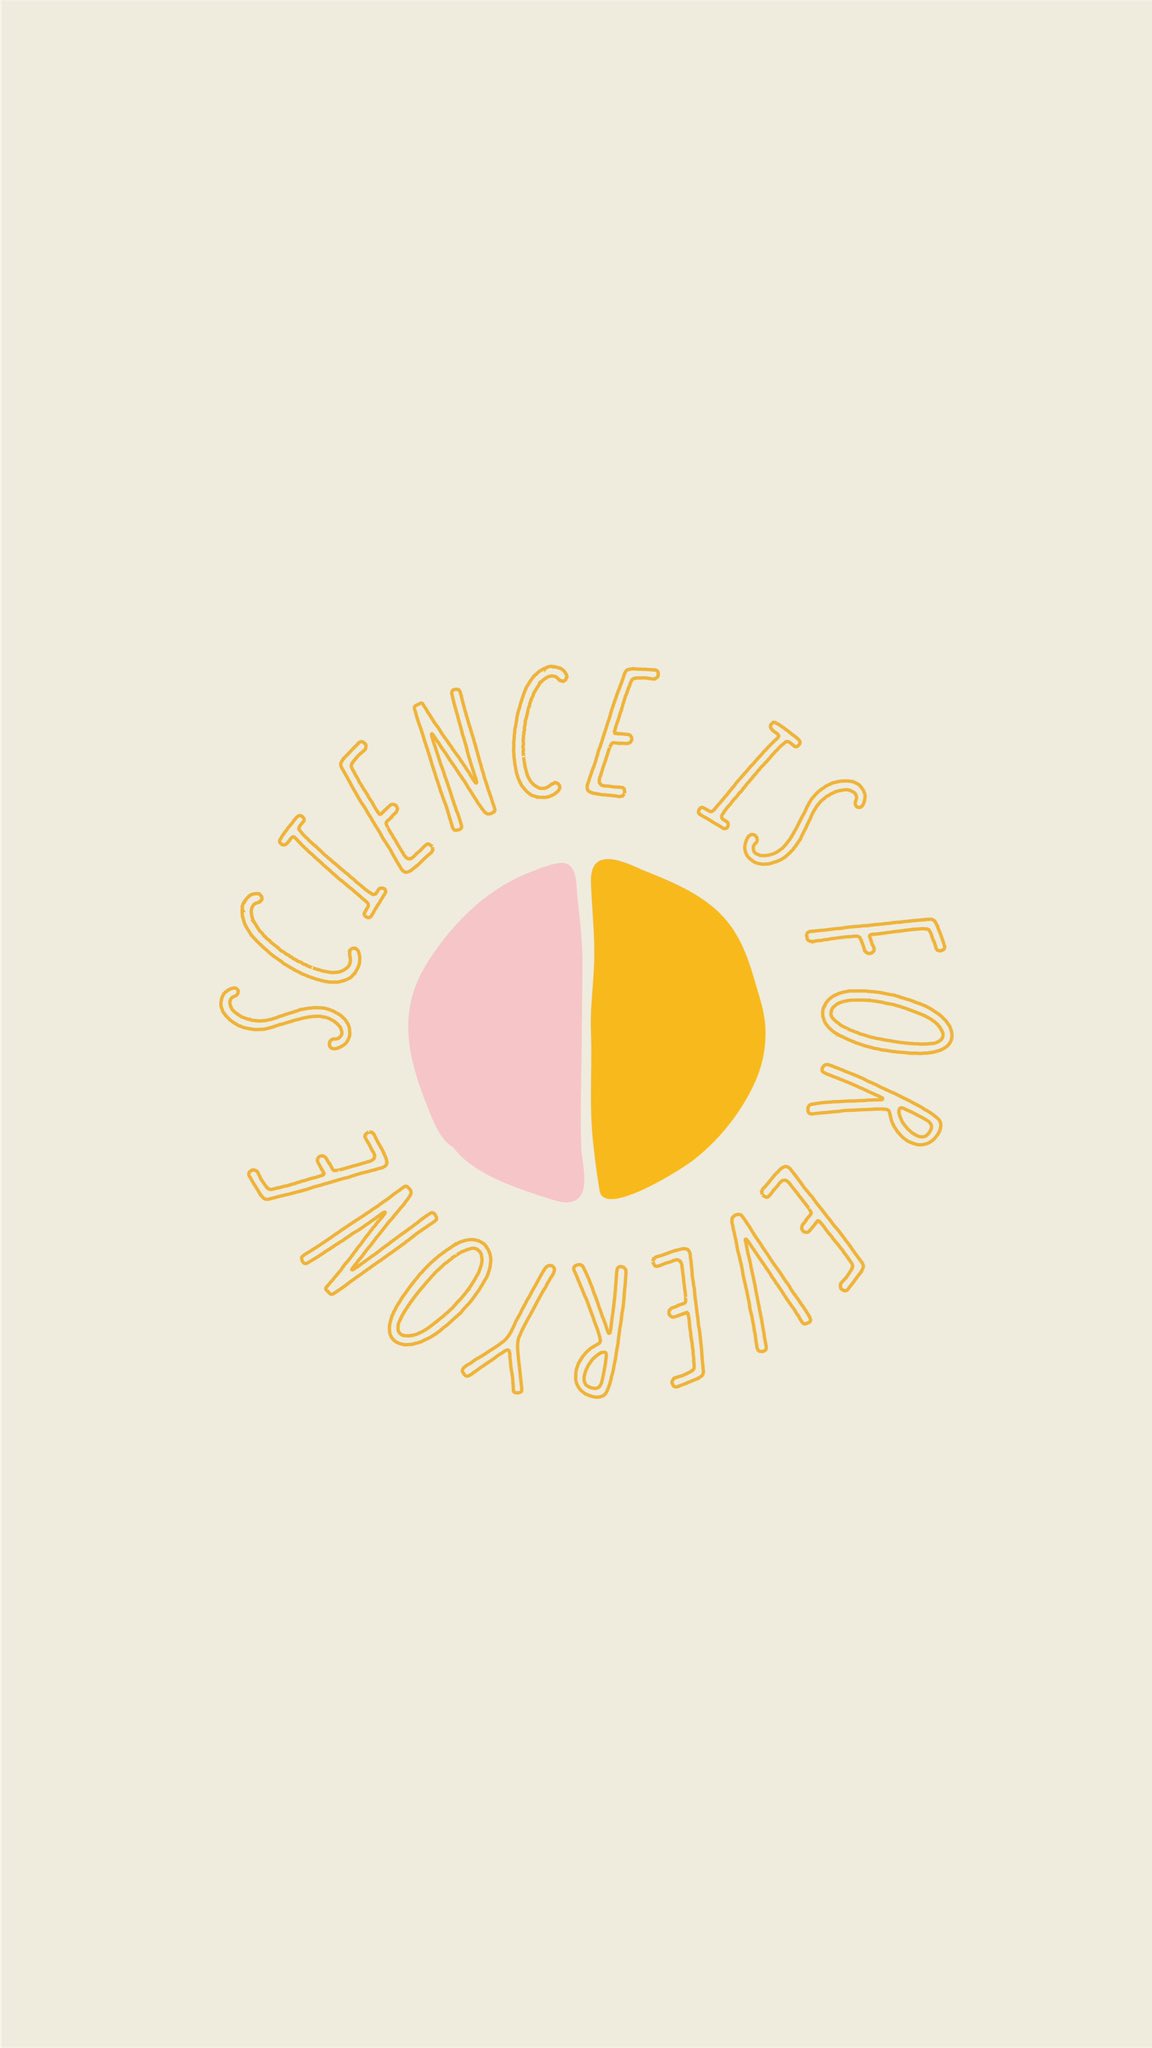 Little Science Co little reminder in case you need it. Science is for everyone. Whether it feels like it to you right now, everyone can and should contribute to